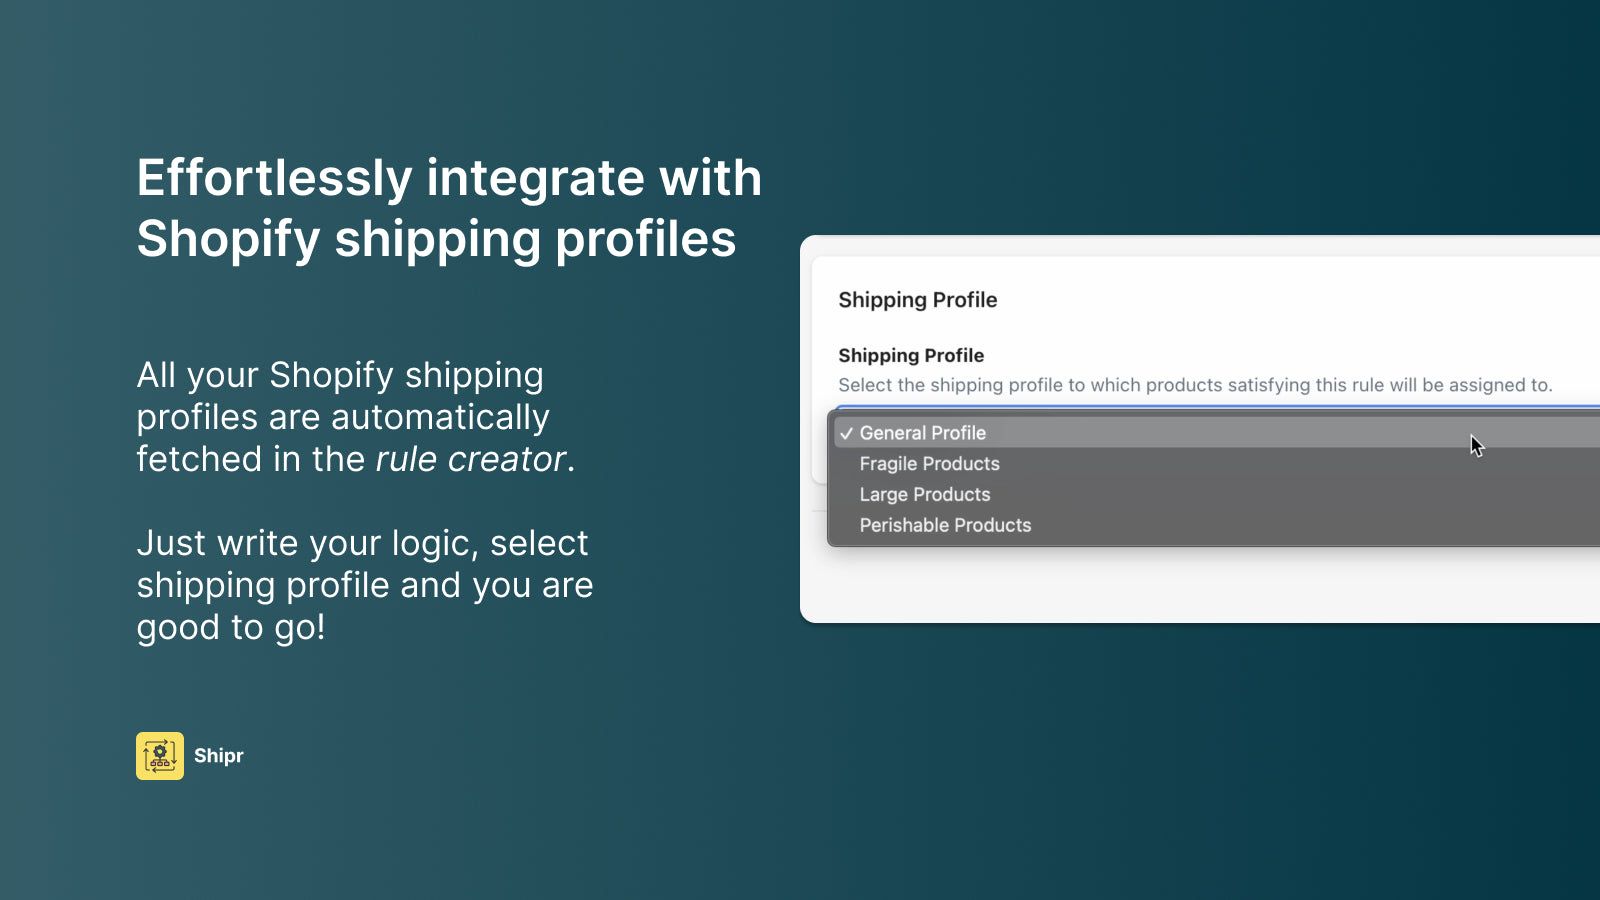 Seamlessly integrate with Shopify shipping profiles